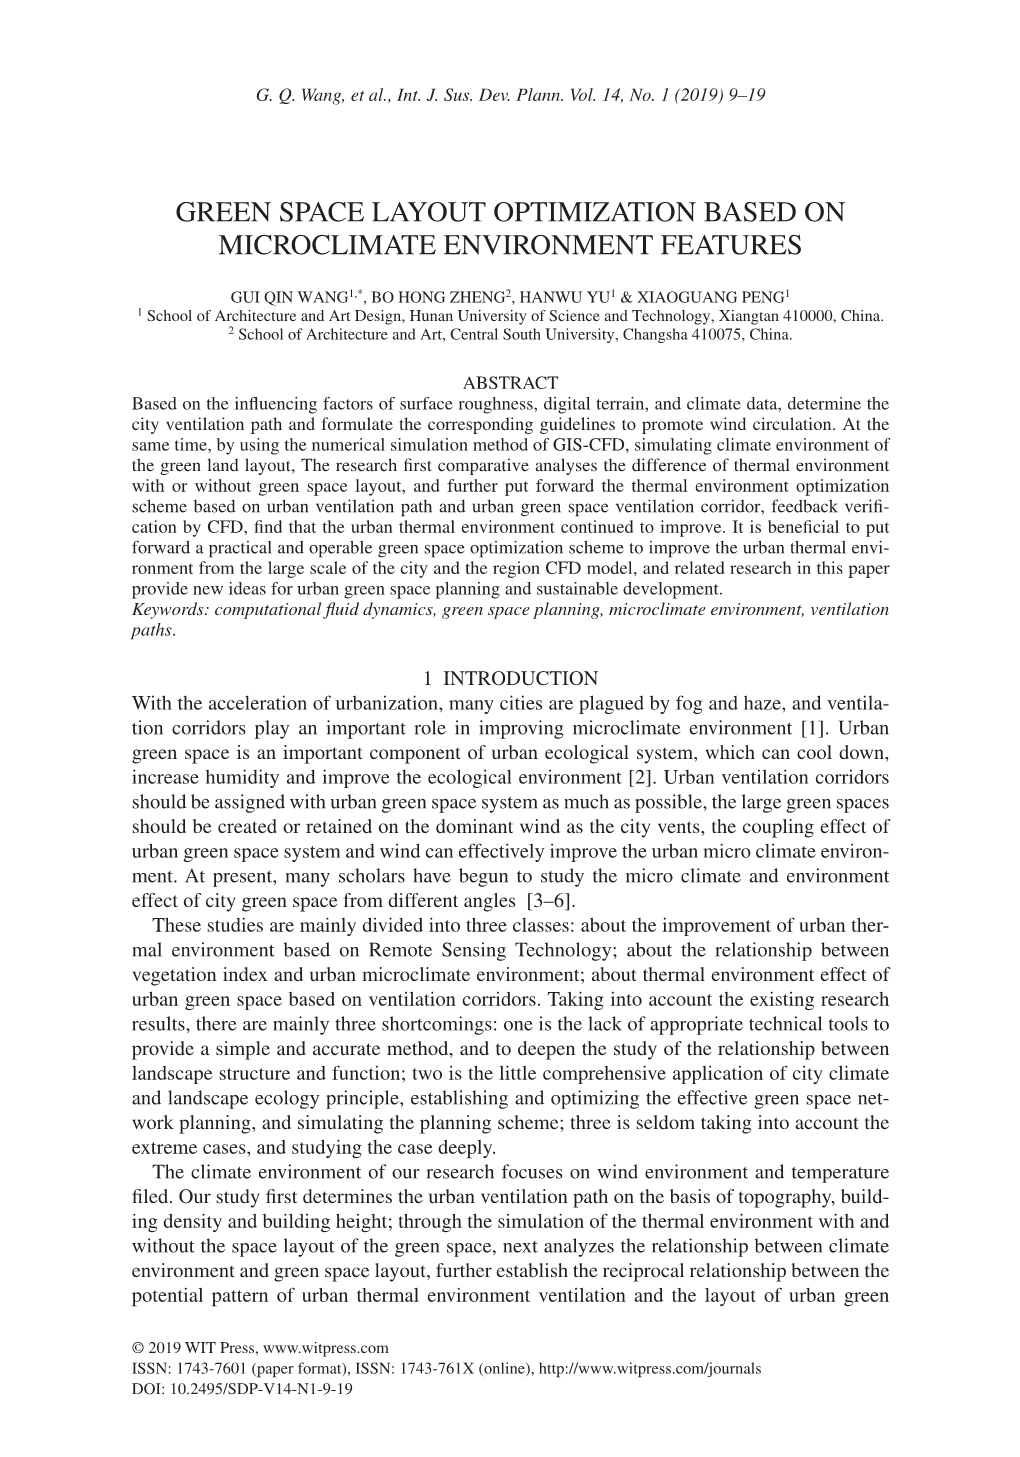 Green Space Layout Optimization Based on Microclimate Environment Features